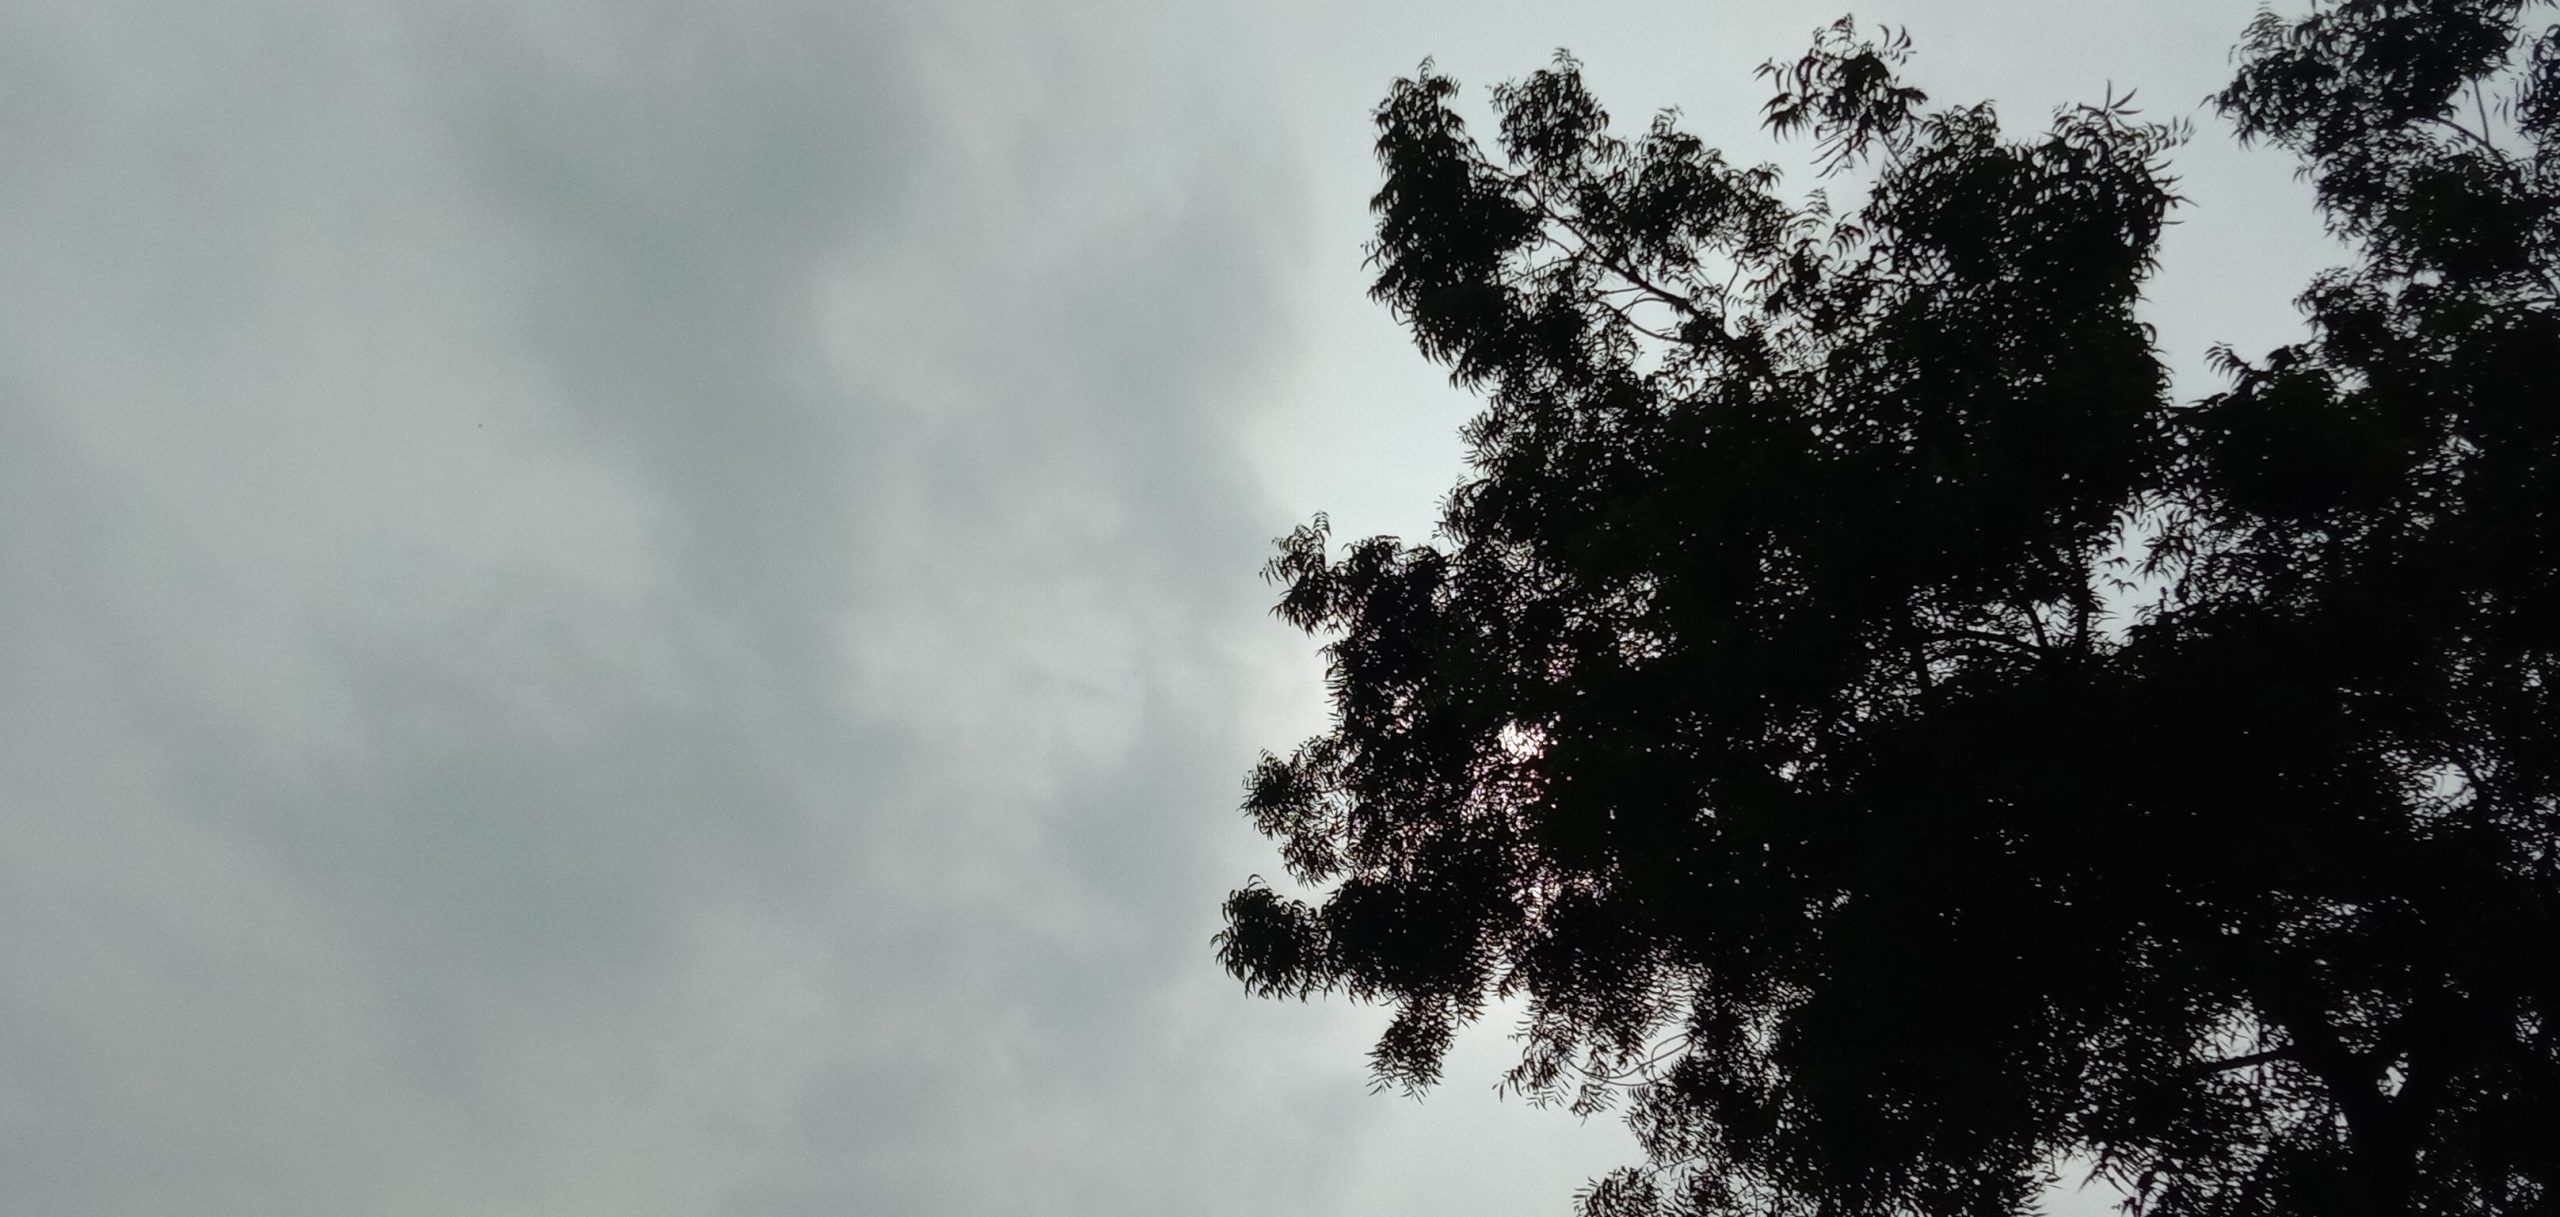 Rainy Clouds over the tree